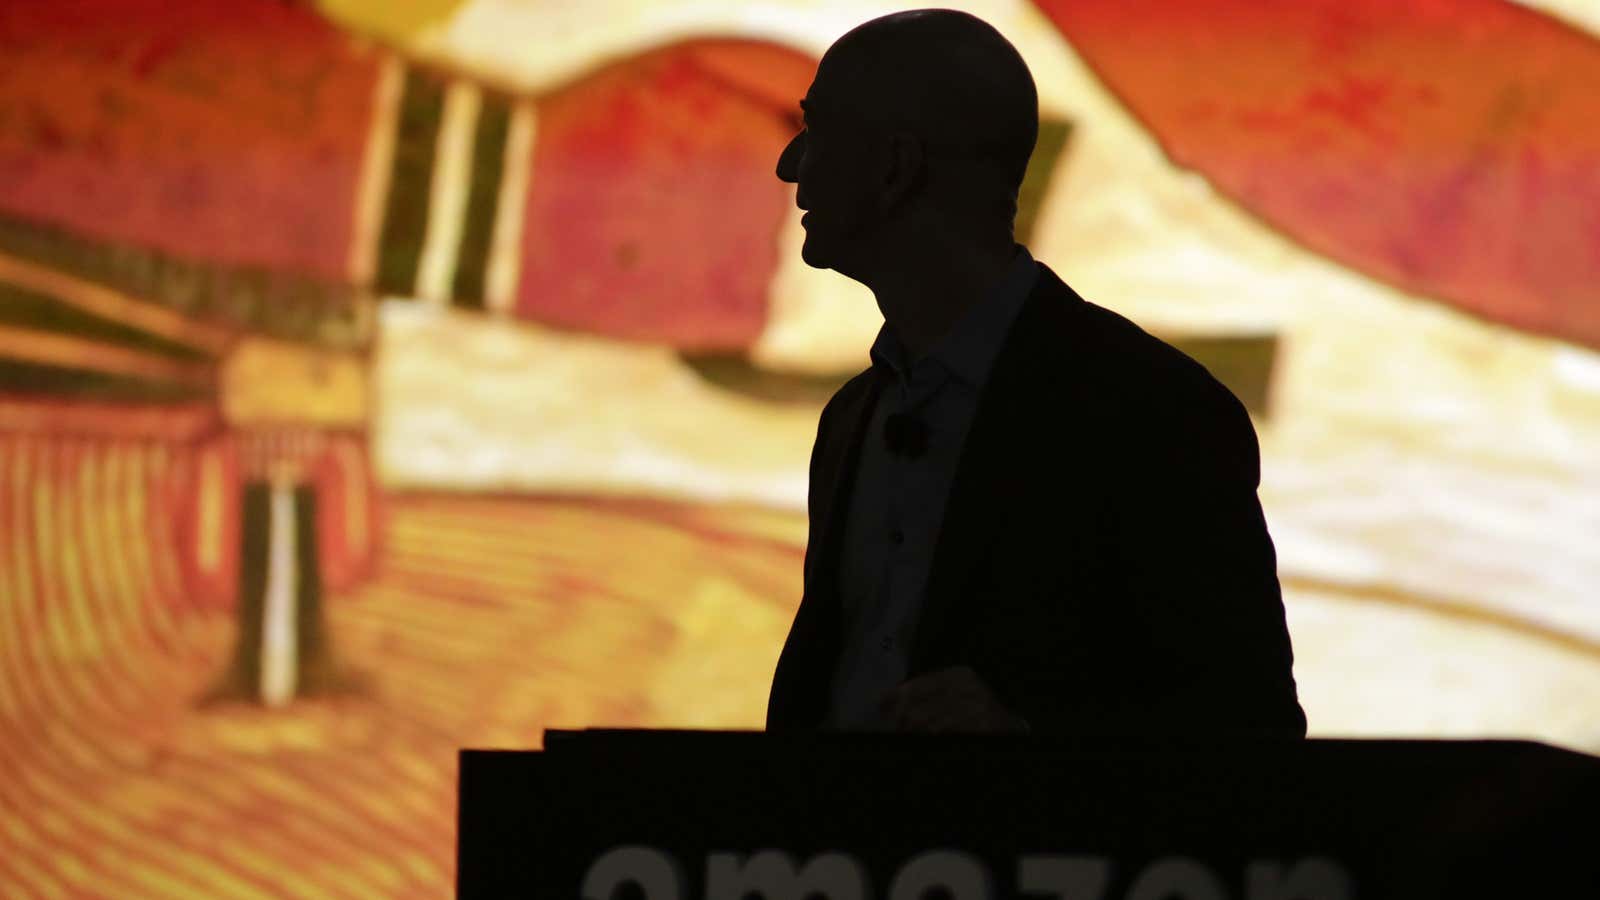 Amazon doesn’t have any e-commerce facilities in Africa, but Bezos’ influence can still be felt.